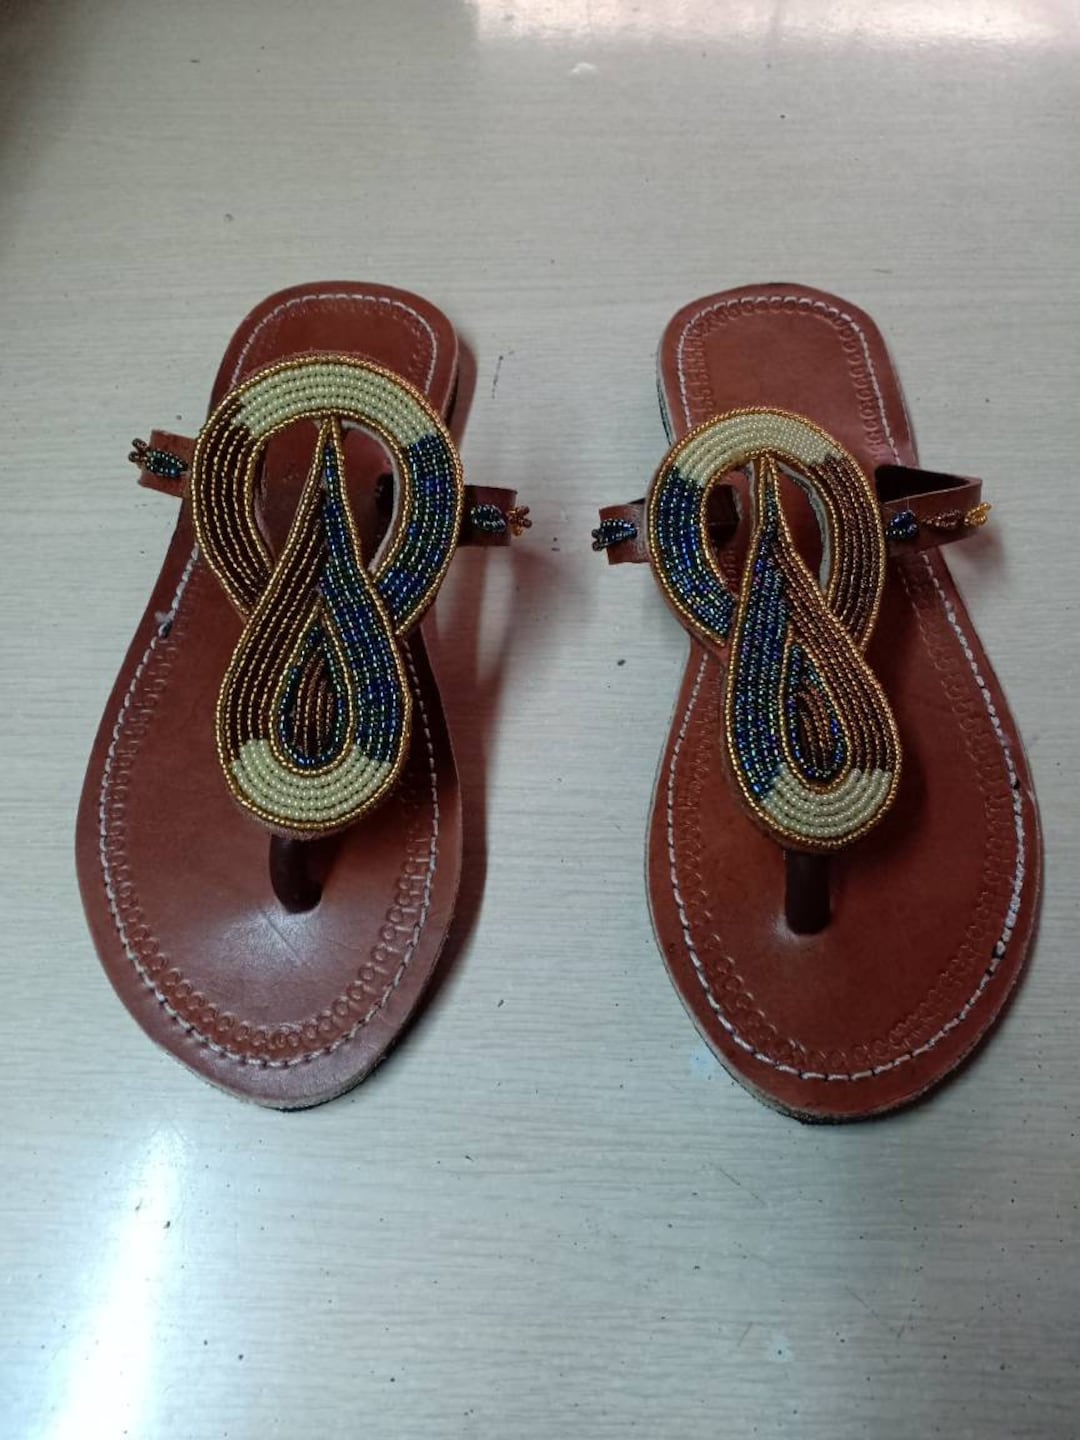 ON Saleafrican Sandals Sandals Women Beaded Shoes Gift for - Etsy